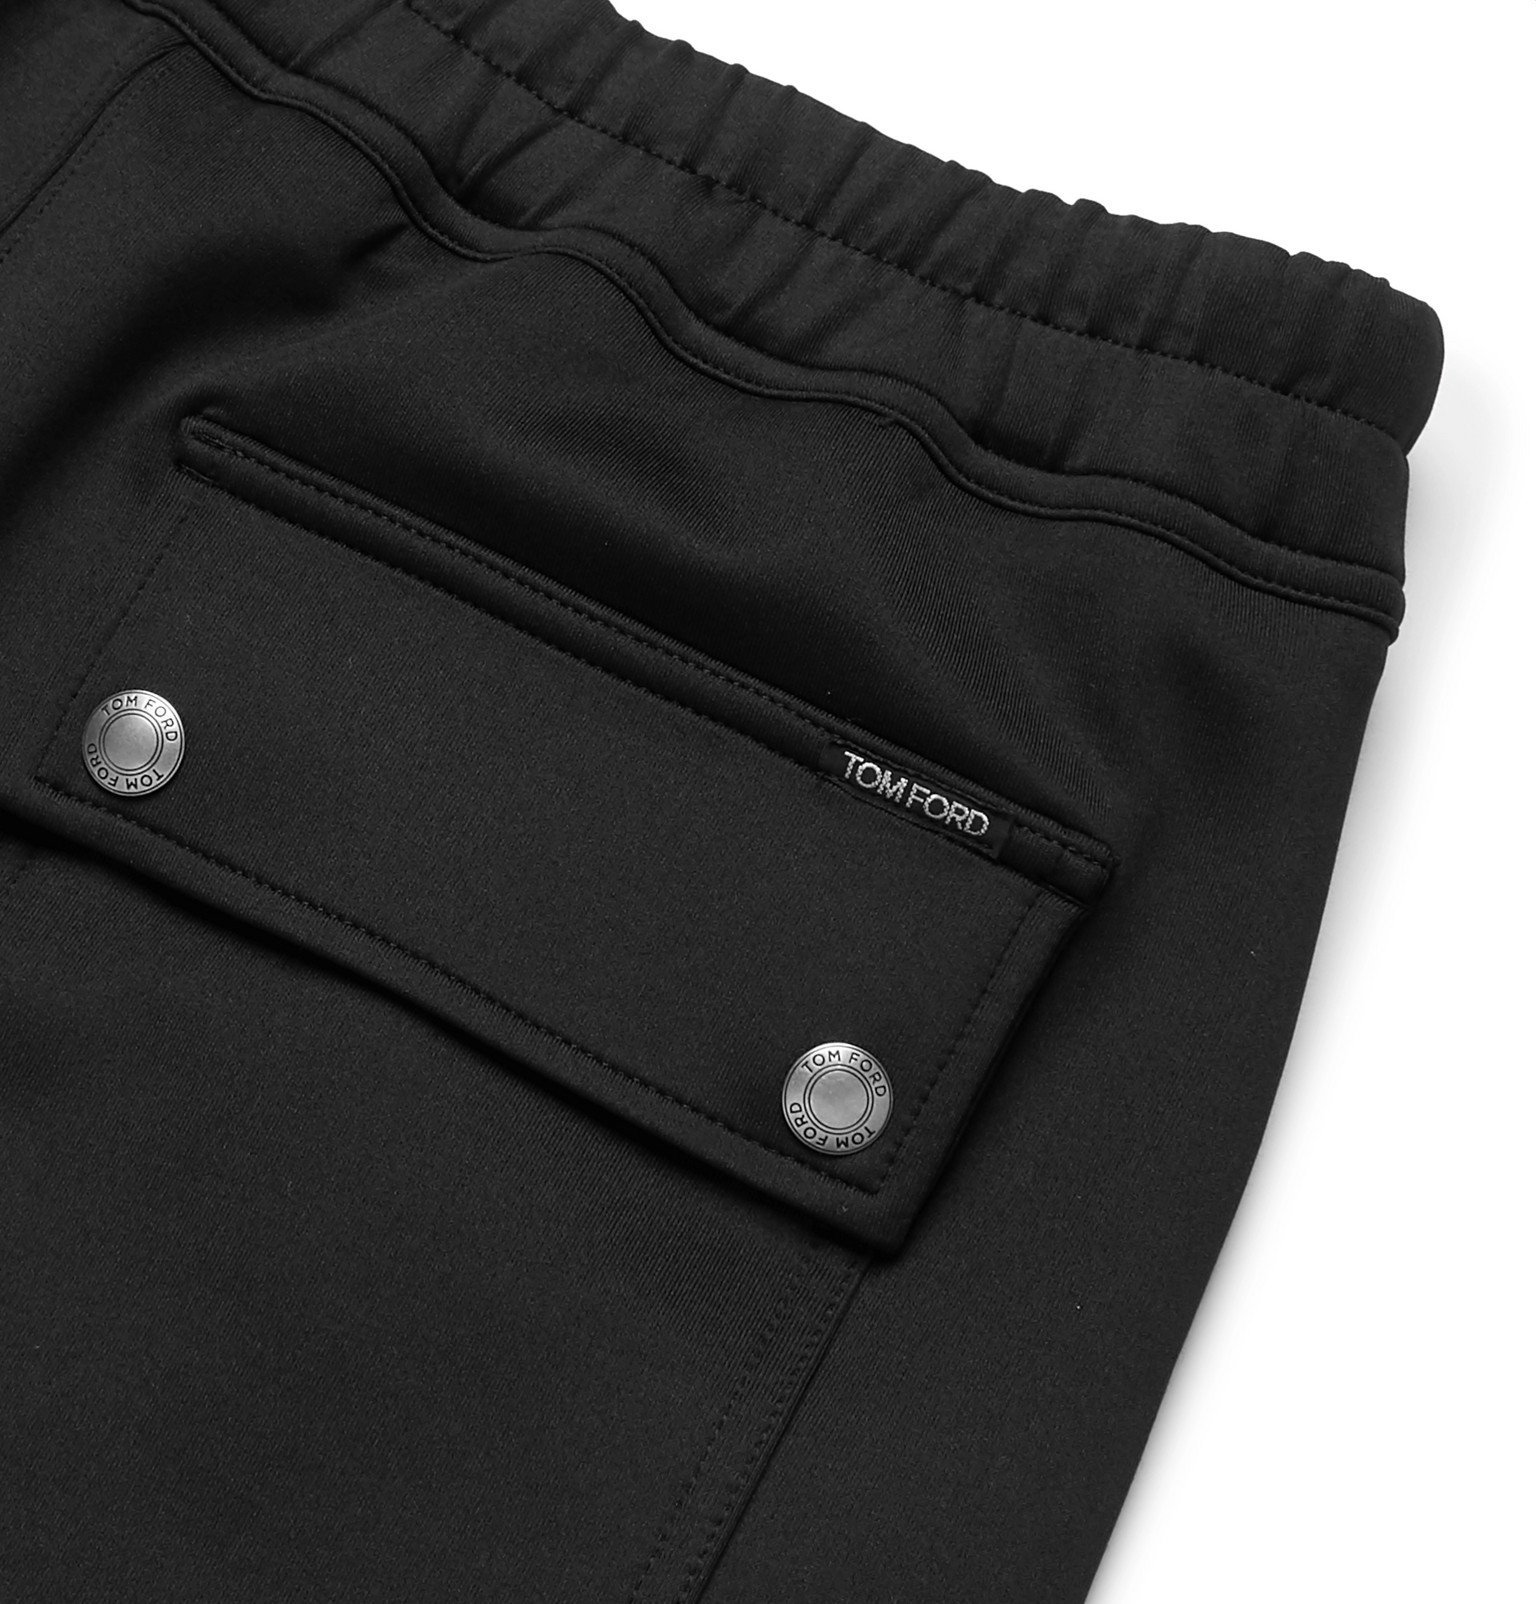 TOM FORD - Tapered Tech-Jersey Sweatpants - Black TOM FORD